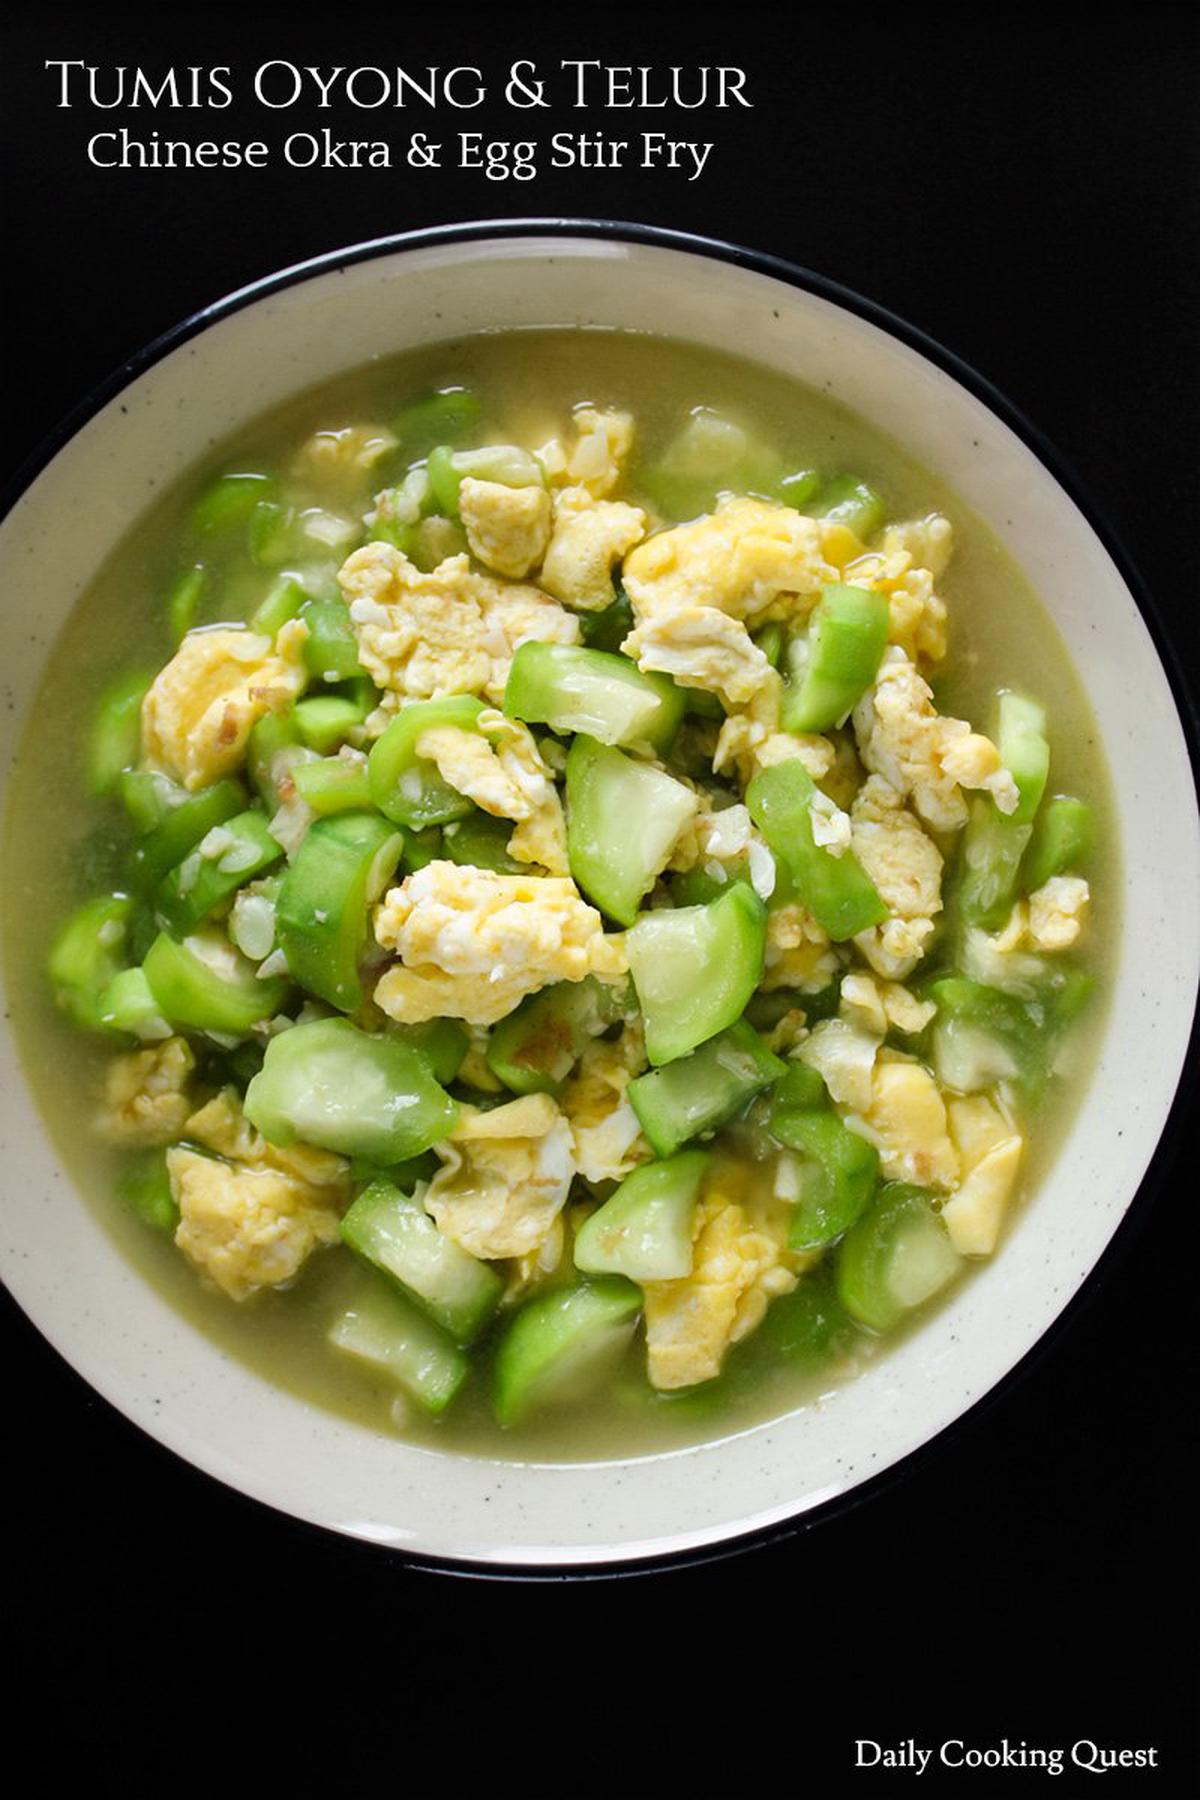 Tumis Oyong dan Telur - Chinese Okra and Egg Stir Fry | Daily Cooking Quest